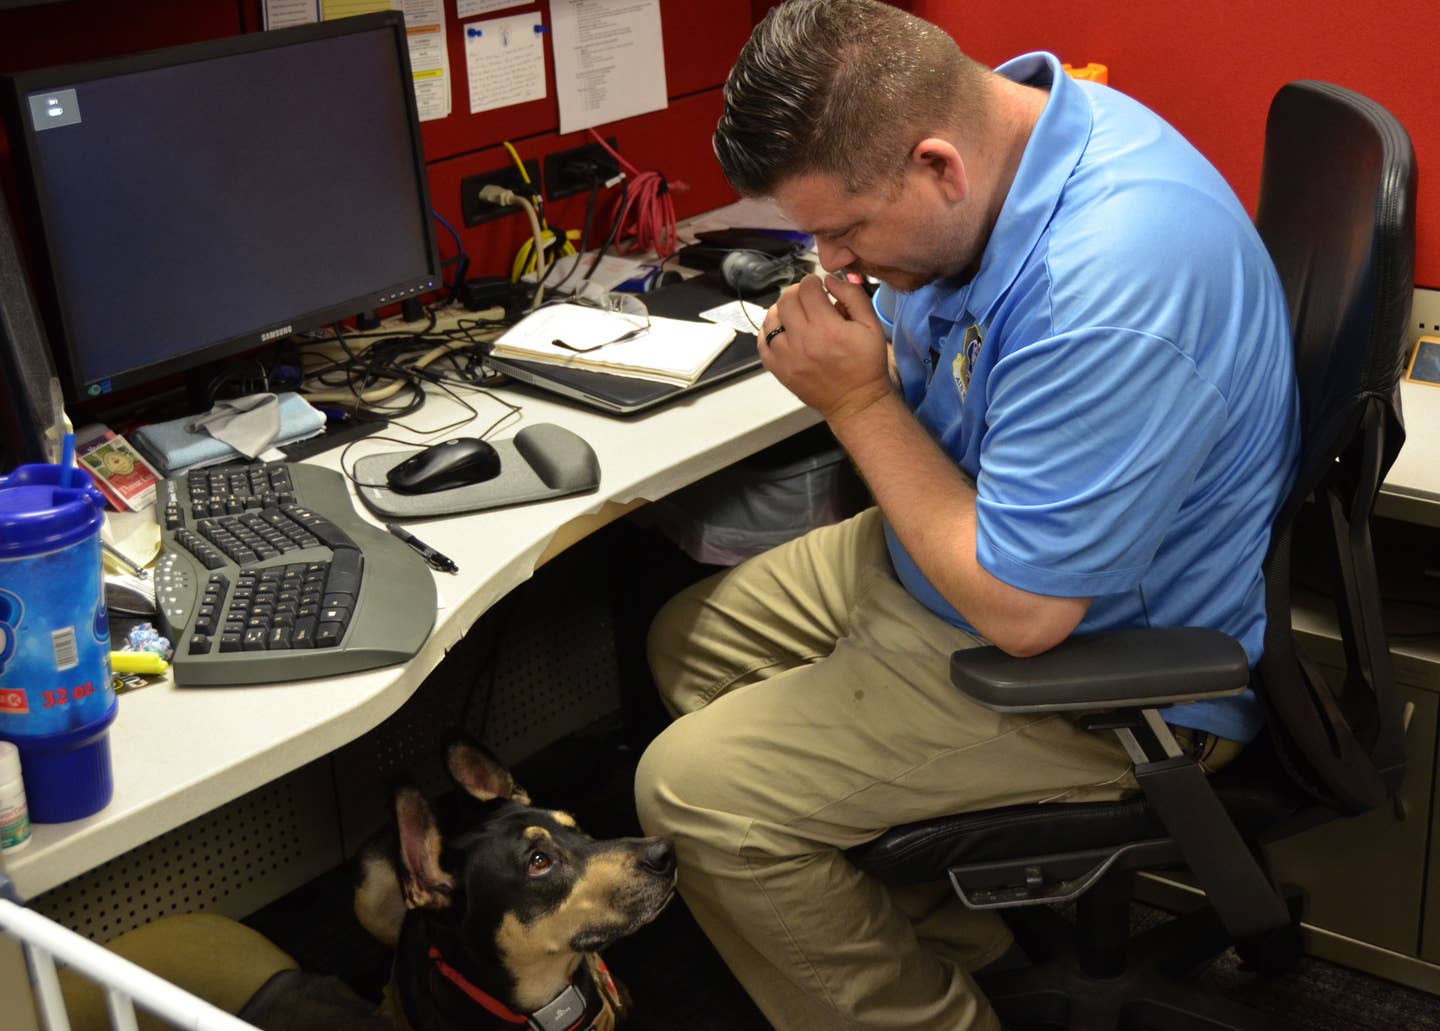 Ryan Kaono, a support agreement manager with the Air Force Installation and Mission Support Center, takes a moment to breath while his service dog Romeo assesses the situation.